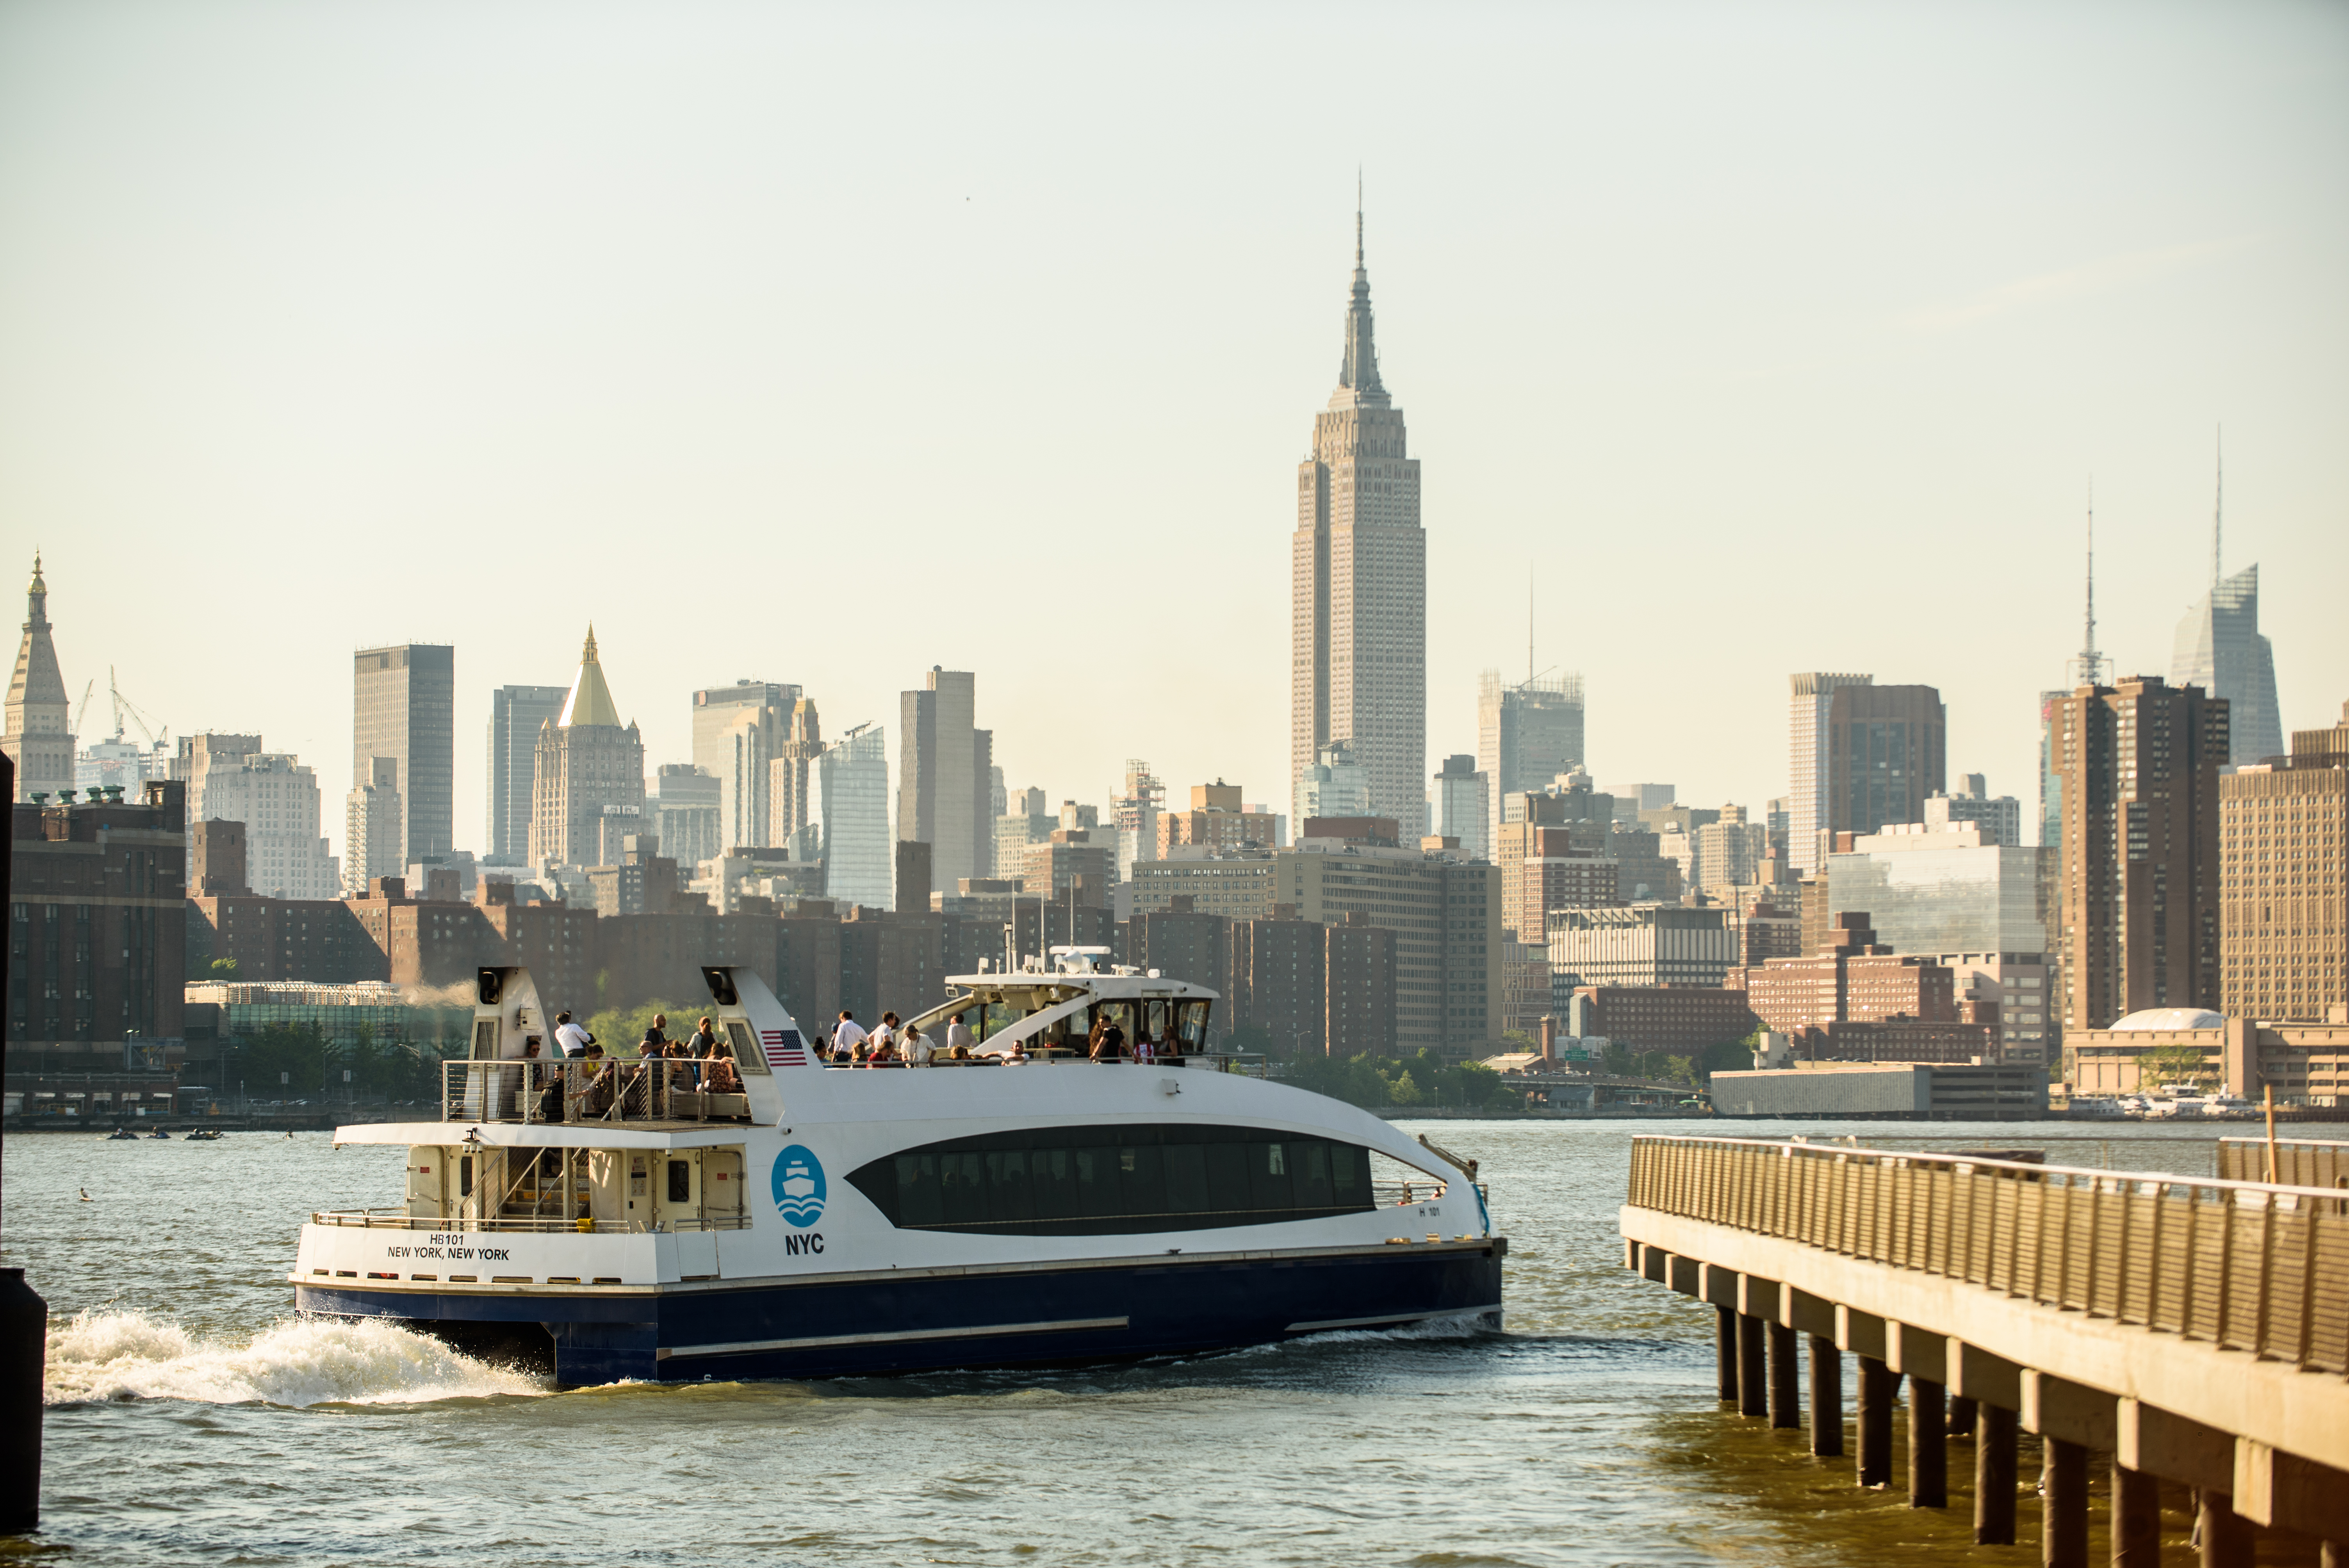 NYC Ferry in front of the Manhattan skyline